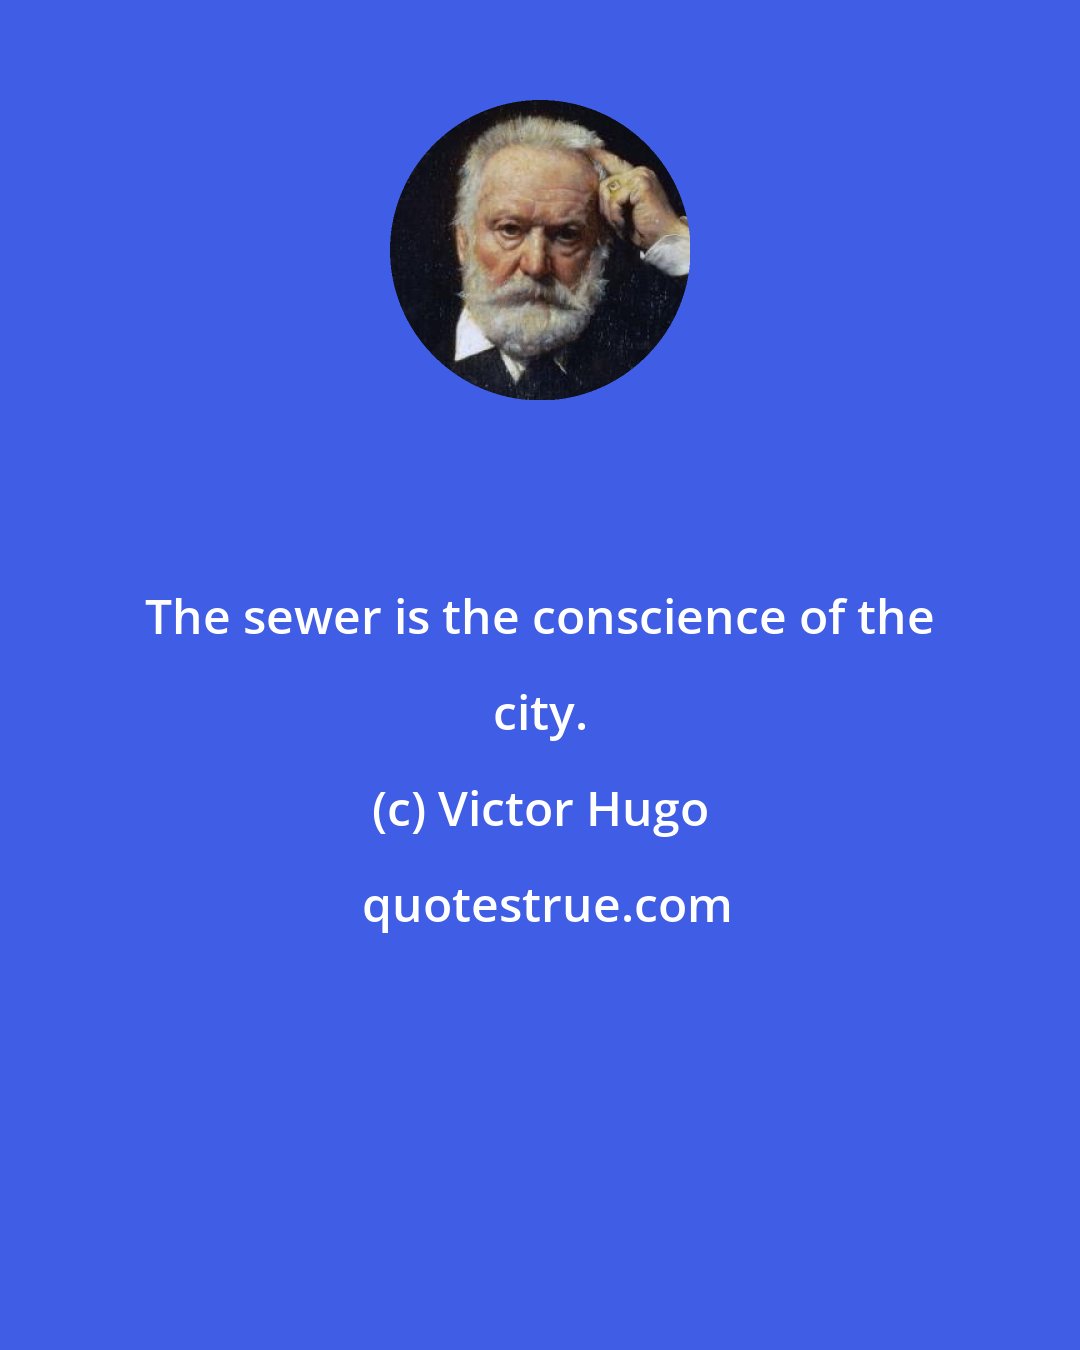 Victor Hugo: The sewer is the conscience of the city.